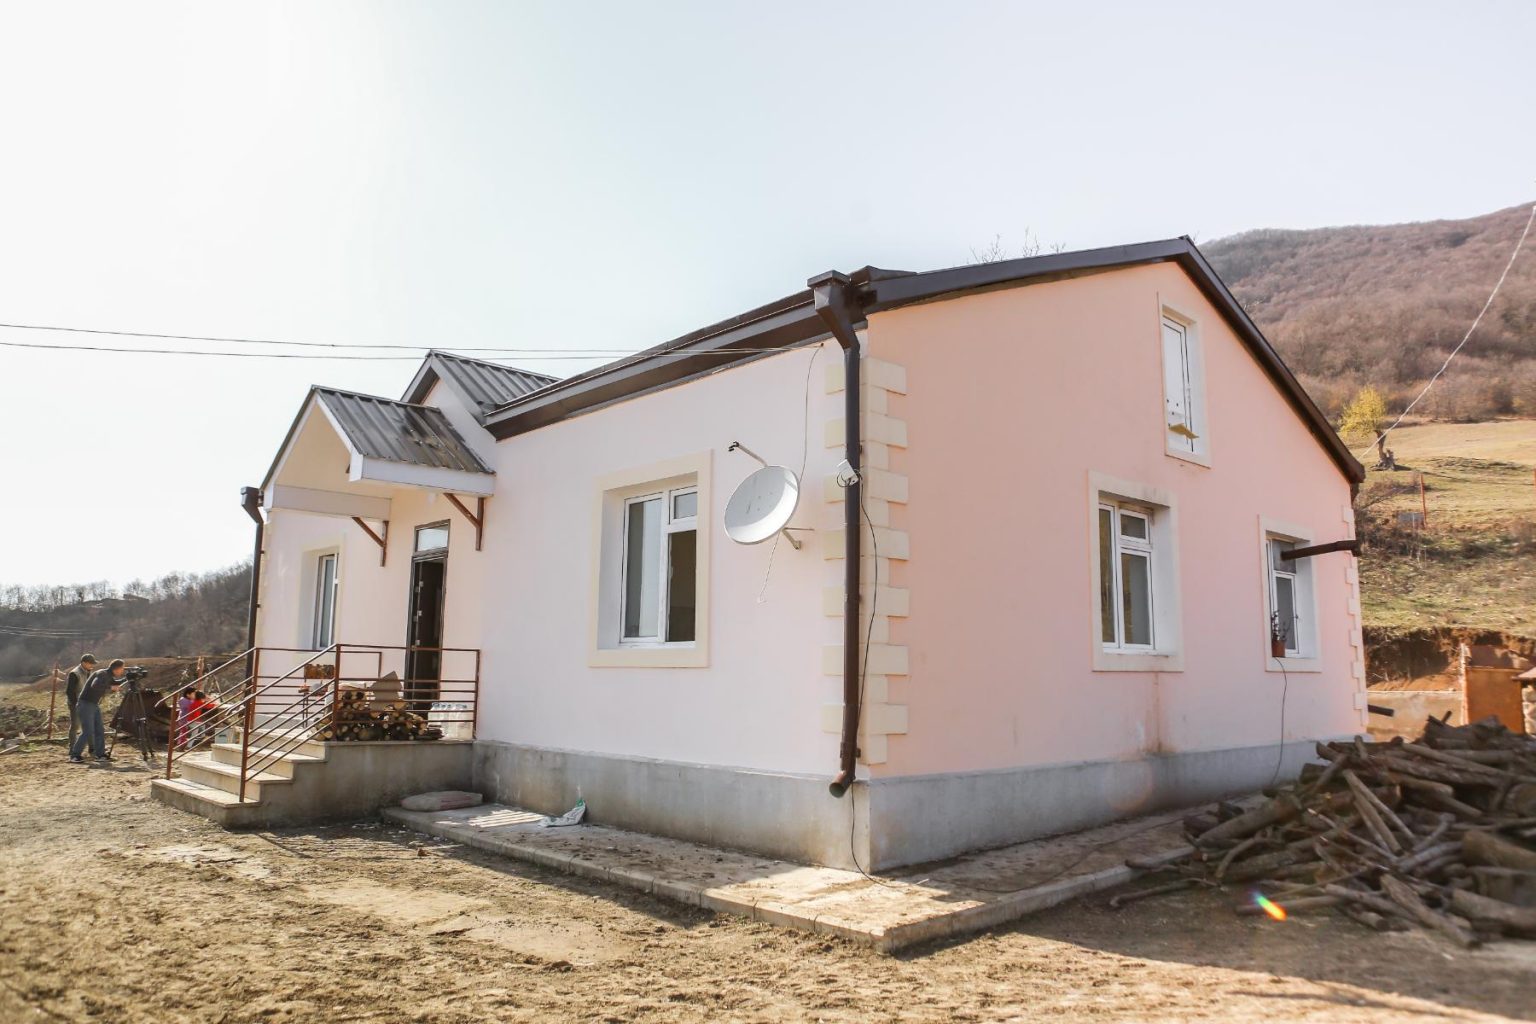 Tufenkian Foundation begins major home renovation project in the villages of Martuni - The US Armenians